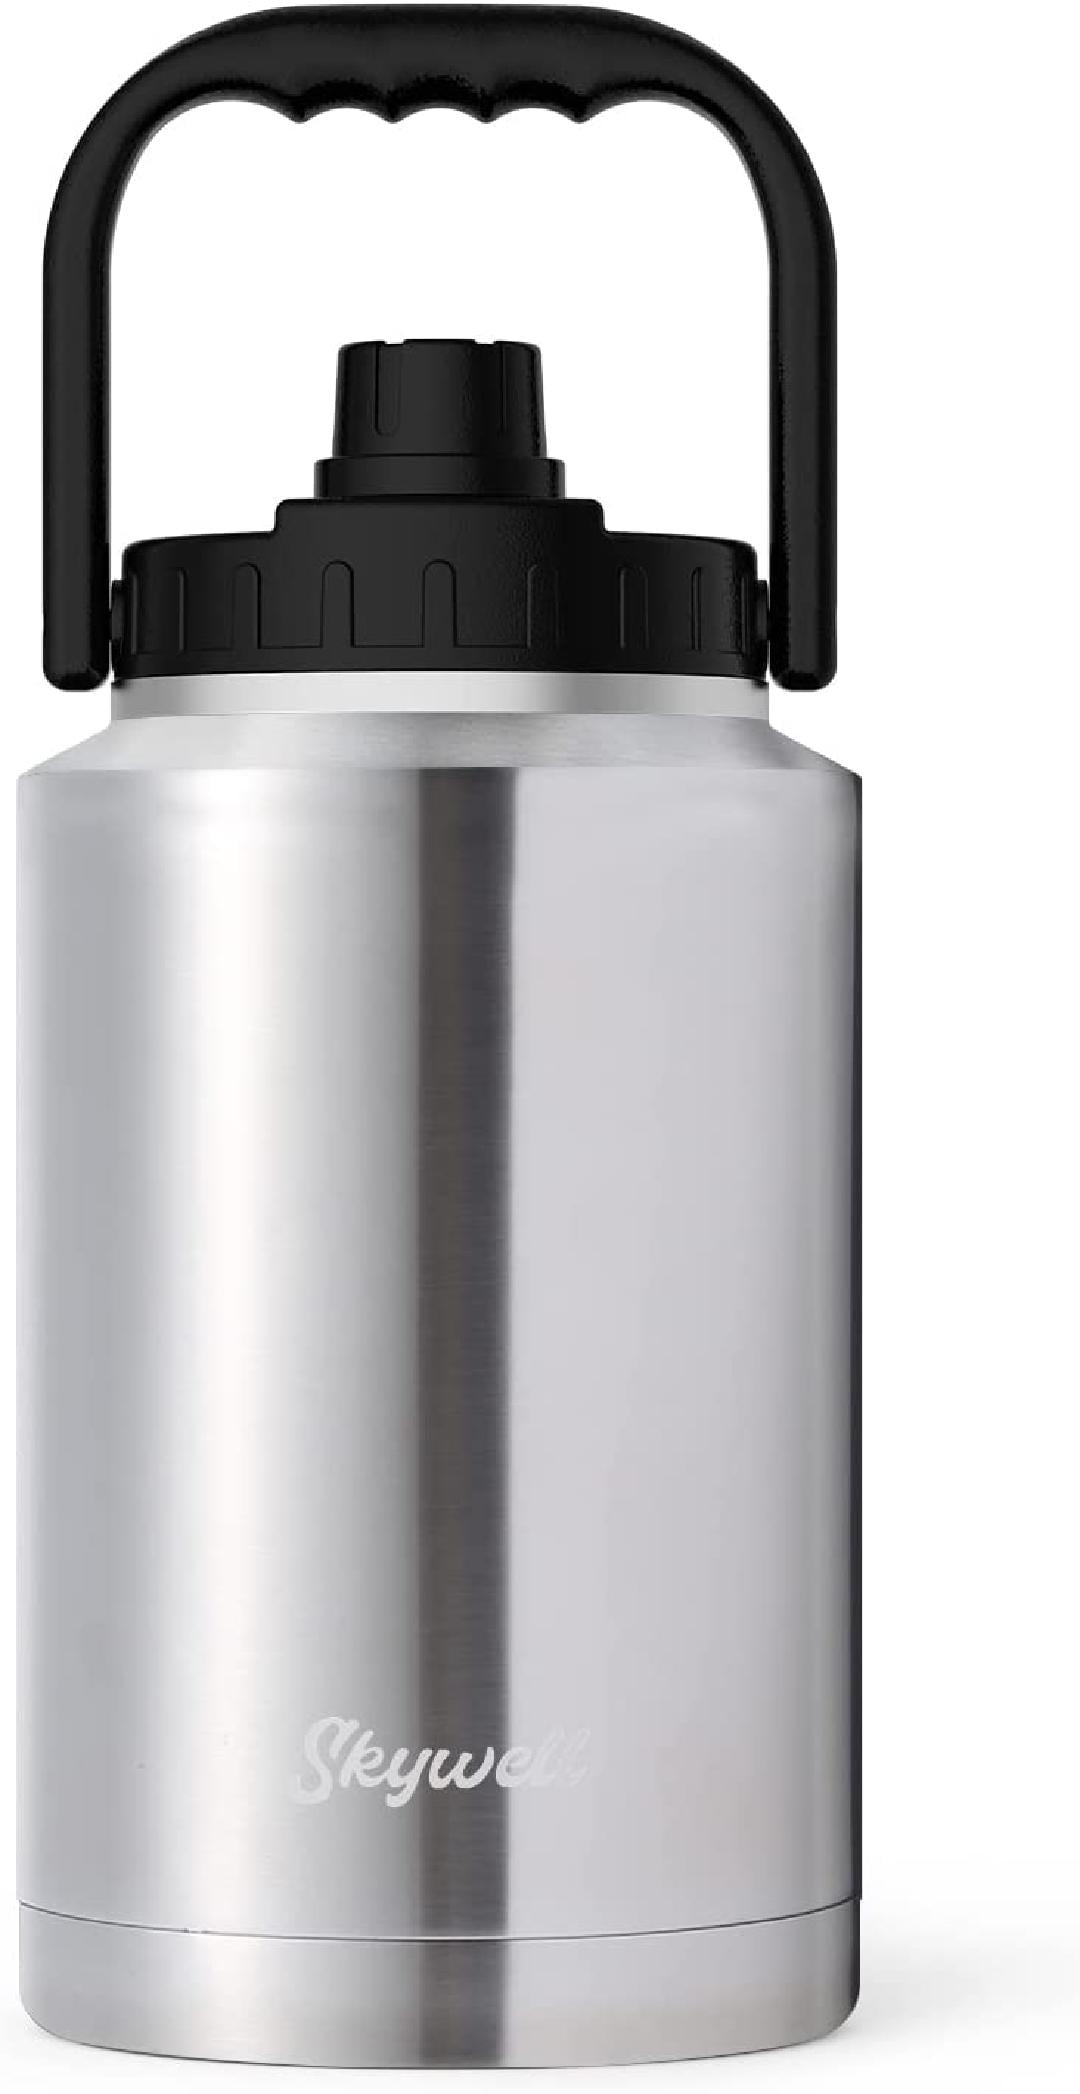 TAHOE TRAILS 1 Gallon Vacuum Insulated Water Bottle,1 Gallon Stainless  Steel Double Walled Water Jug,18/8 Food-Grade Stainless Steel Insulated  Water